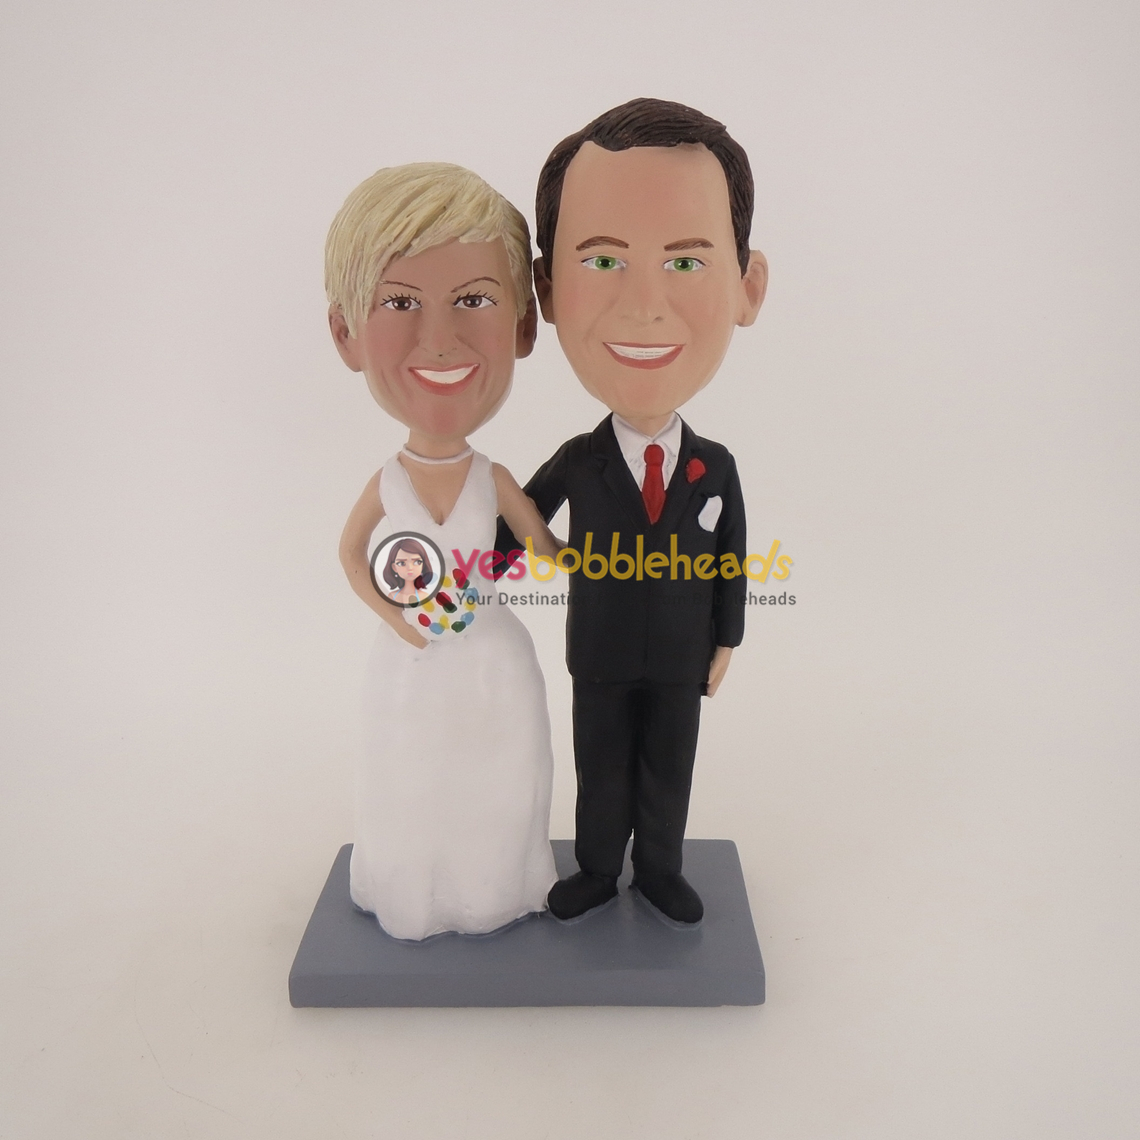 Picture of Custom Bobblehead Doll: Arms Crossed Happy Wedding Couple